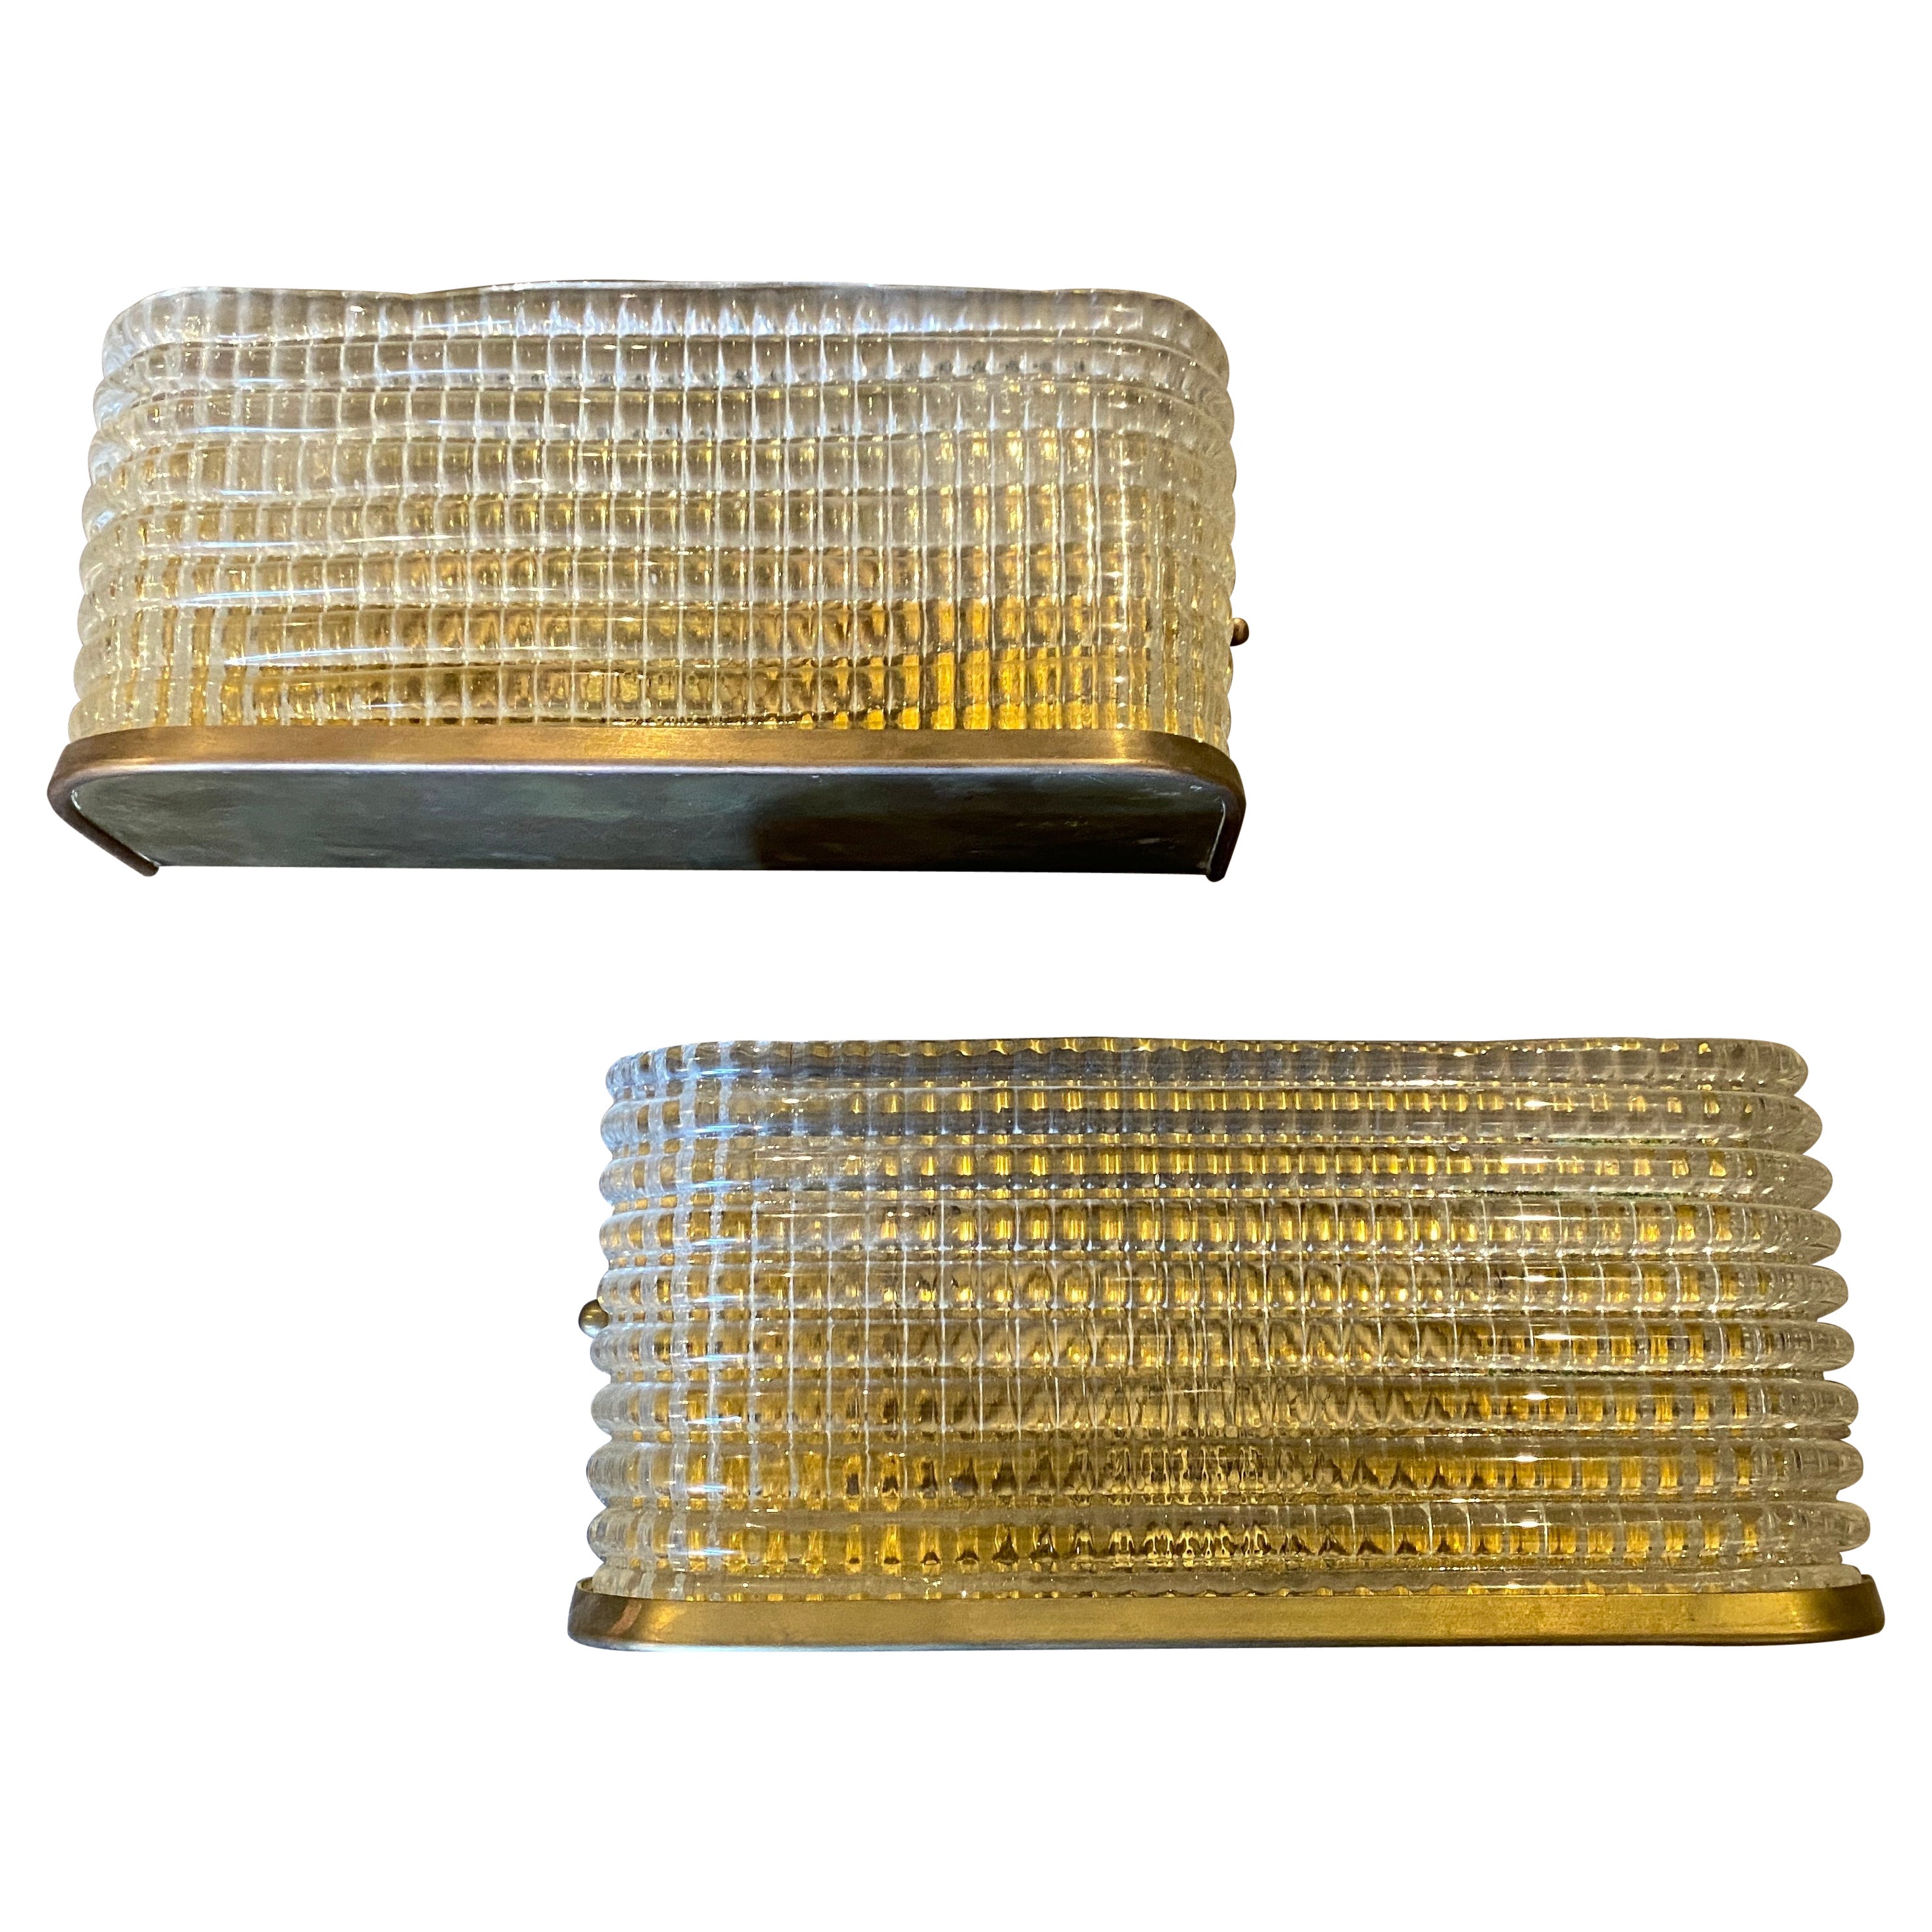 Two 1970s Mid-Century Modern Italian Brass and Glass Rectangular Wall Sconces